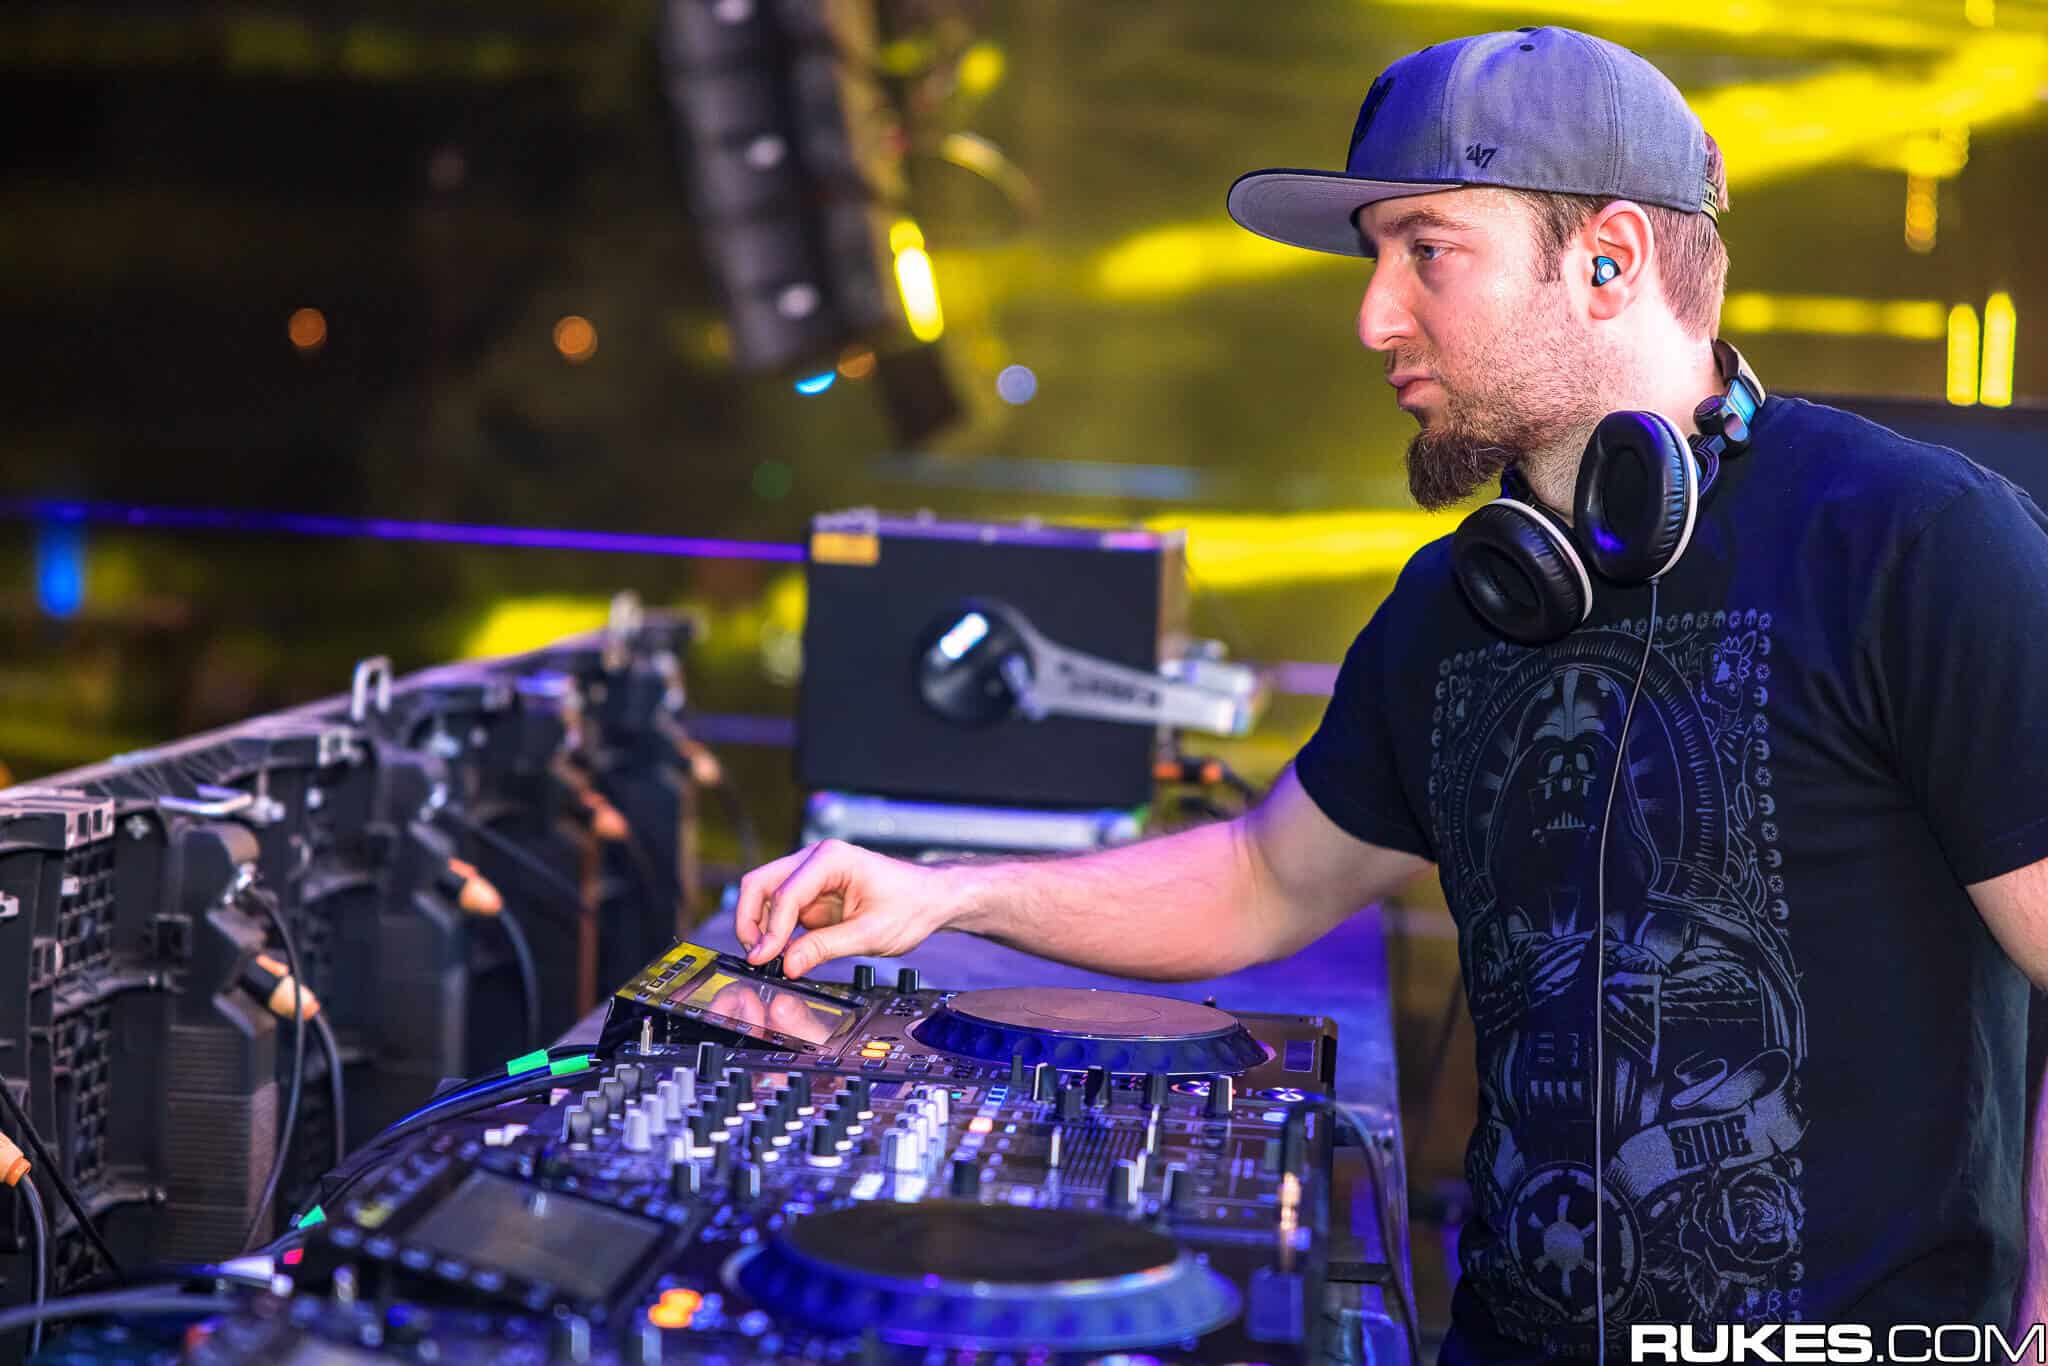 ‘Codename: Reckless’: The explosive new track from Excision and Sullivan King